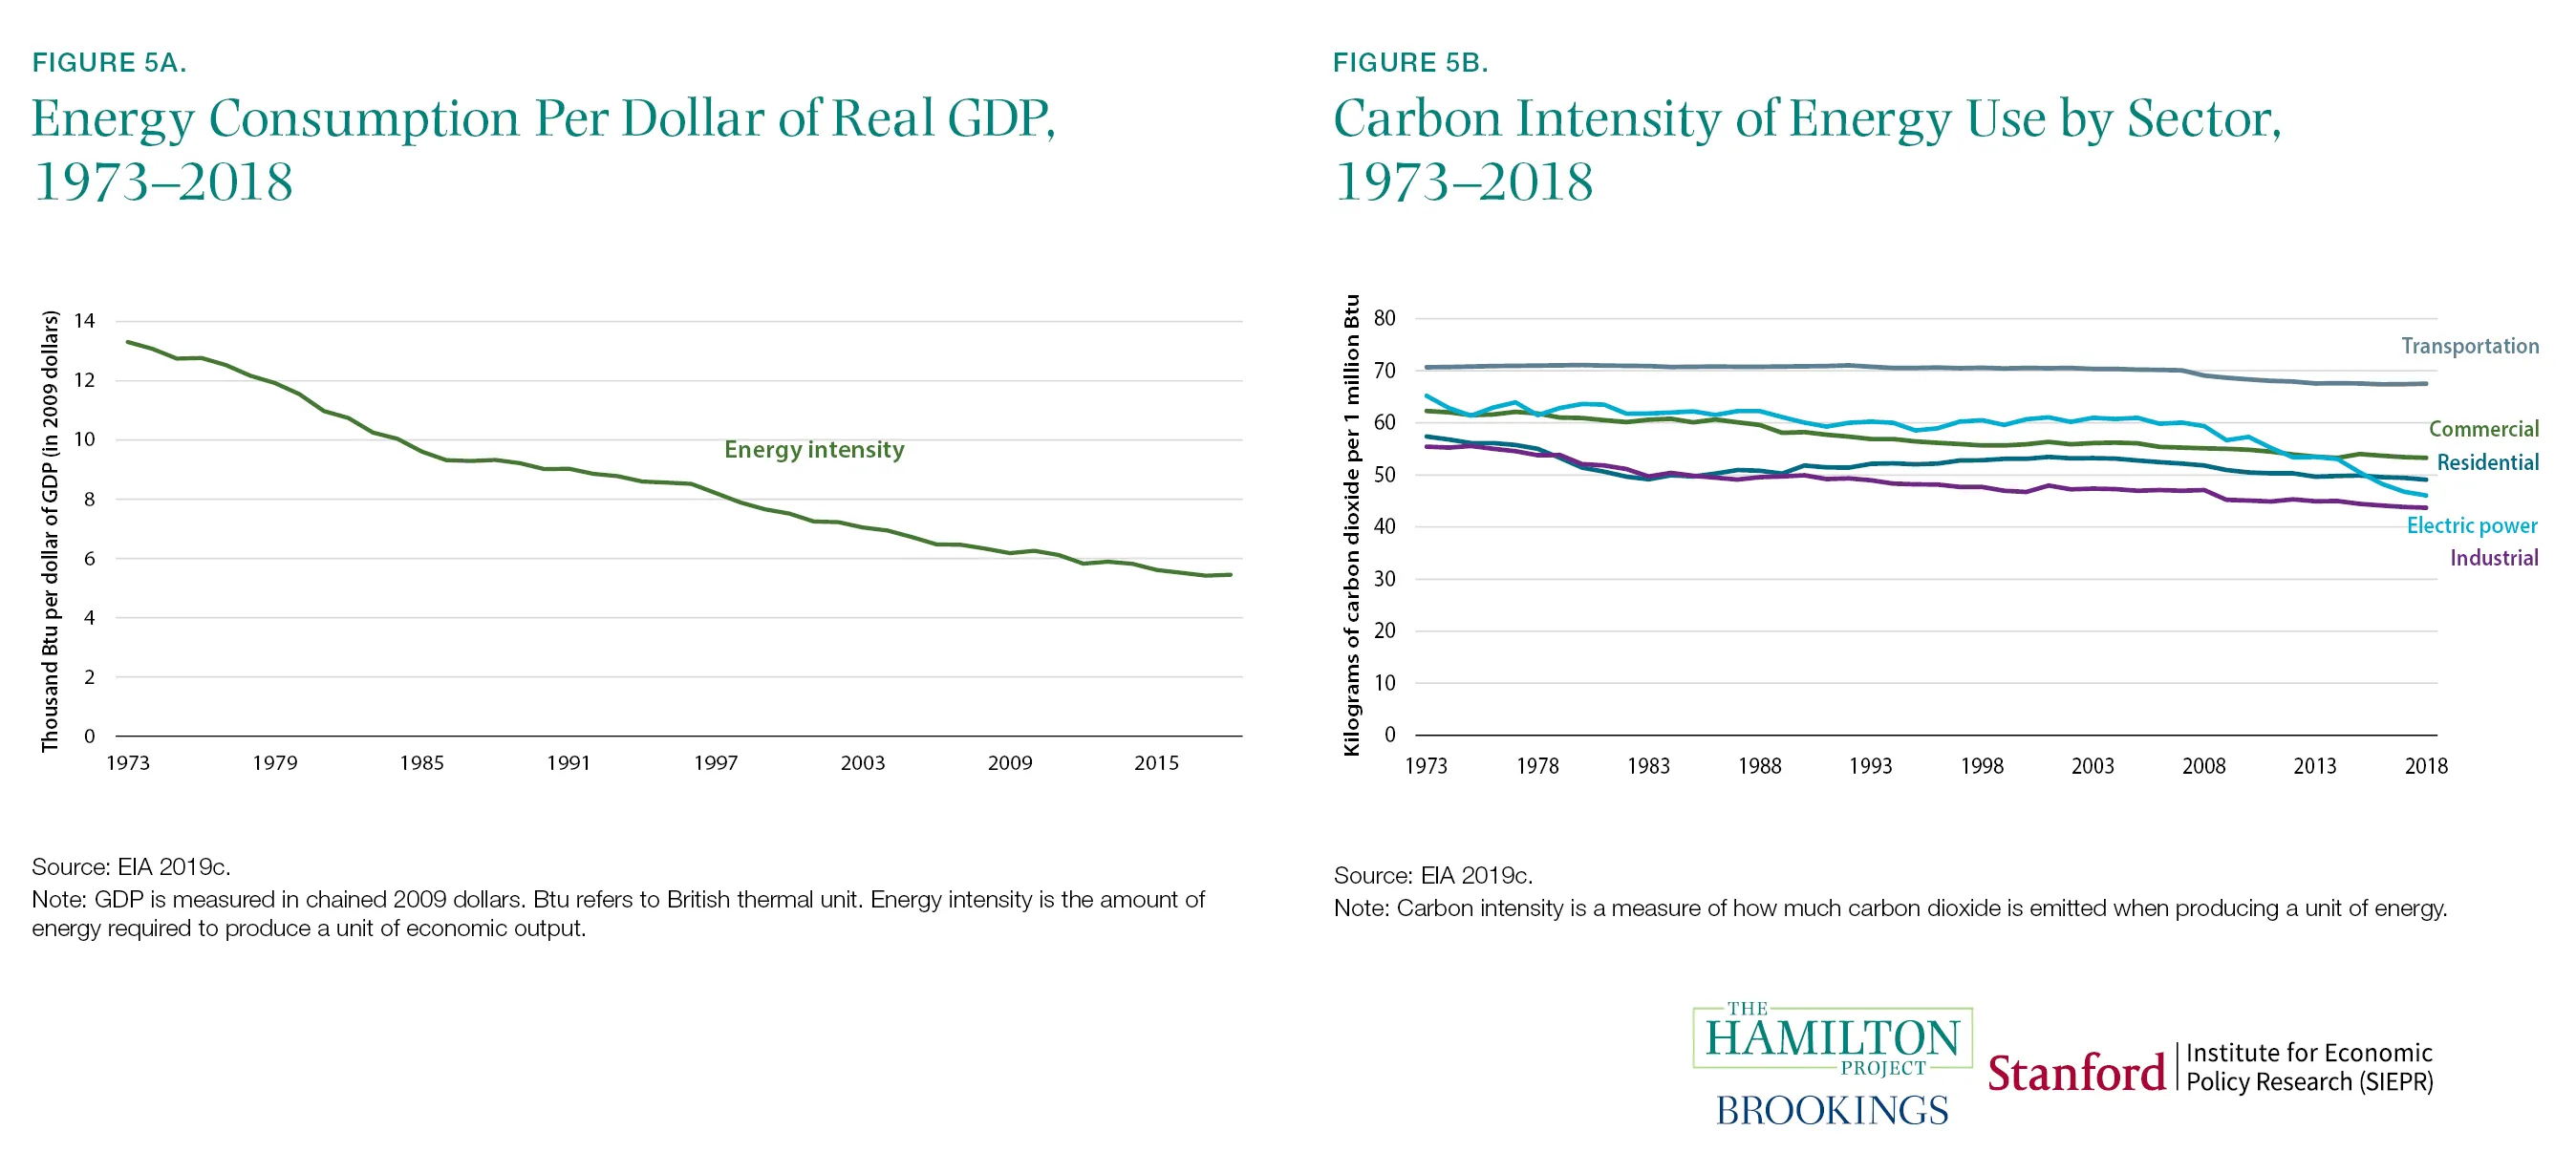 Energy Consumption Per Dollar of Real GDP, 1973-2018 and Carbon Intensity of Energy Use by Sector, 1973-2018